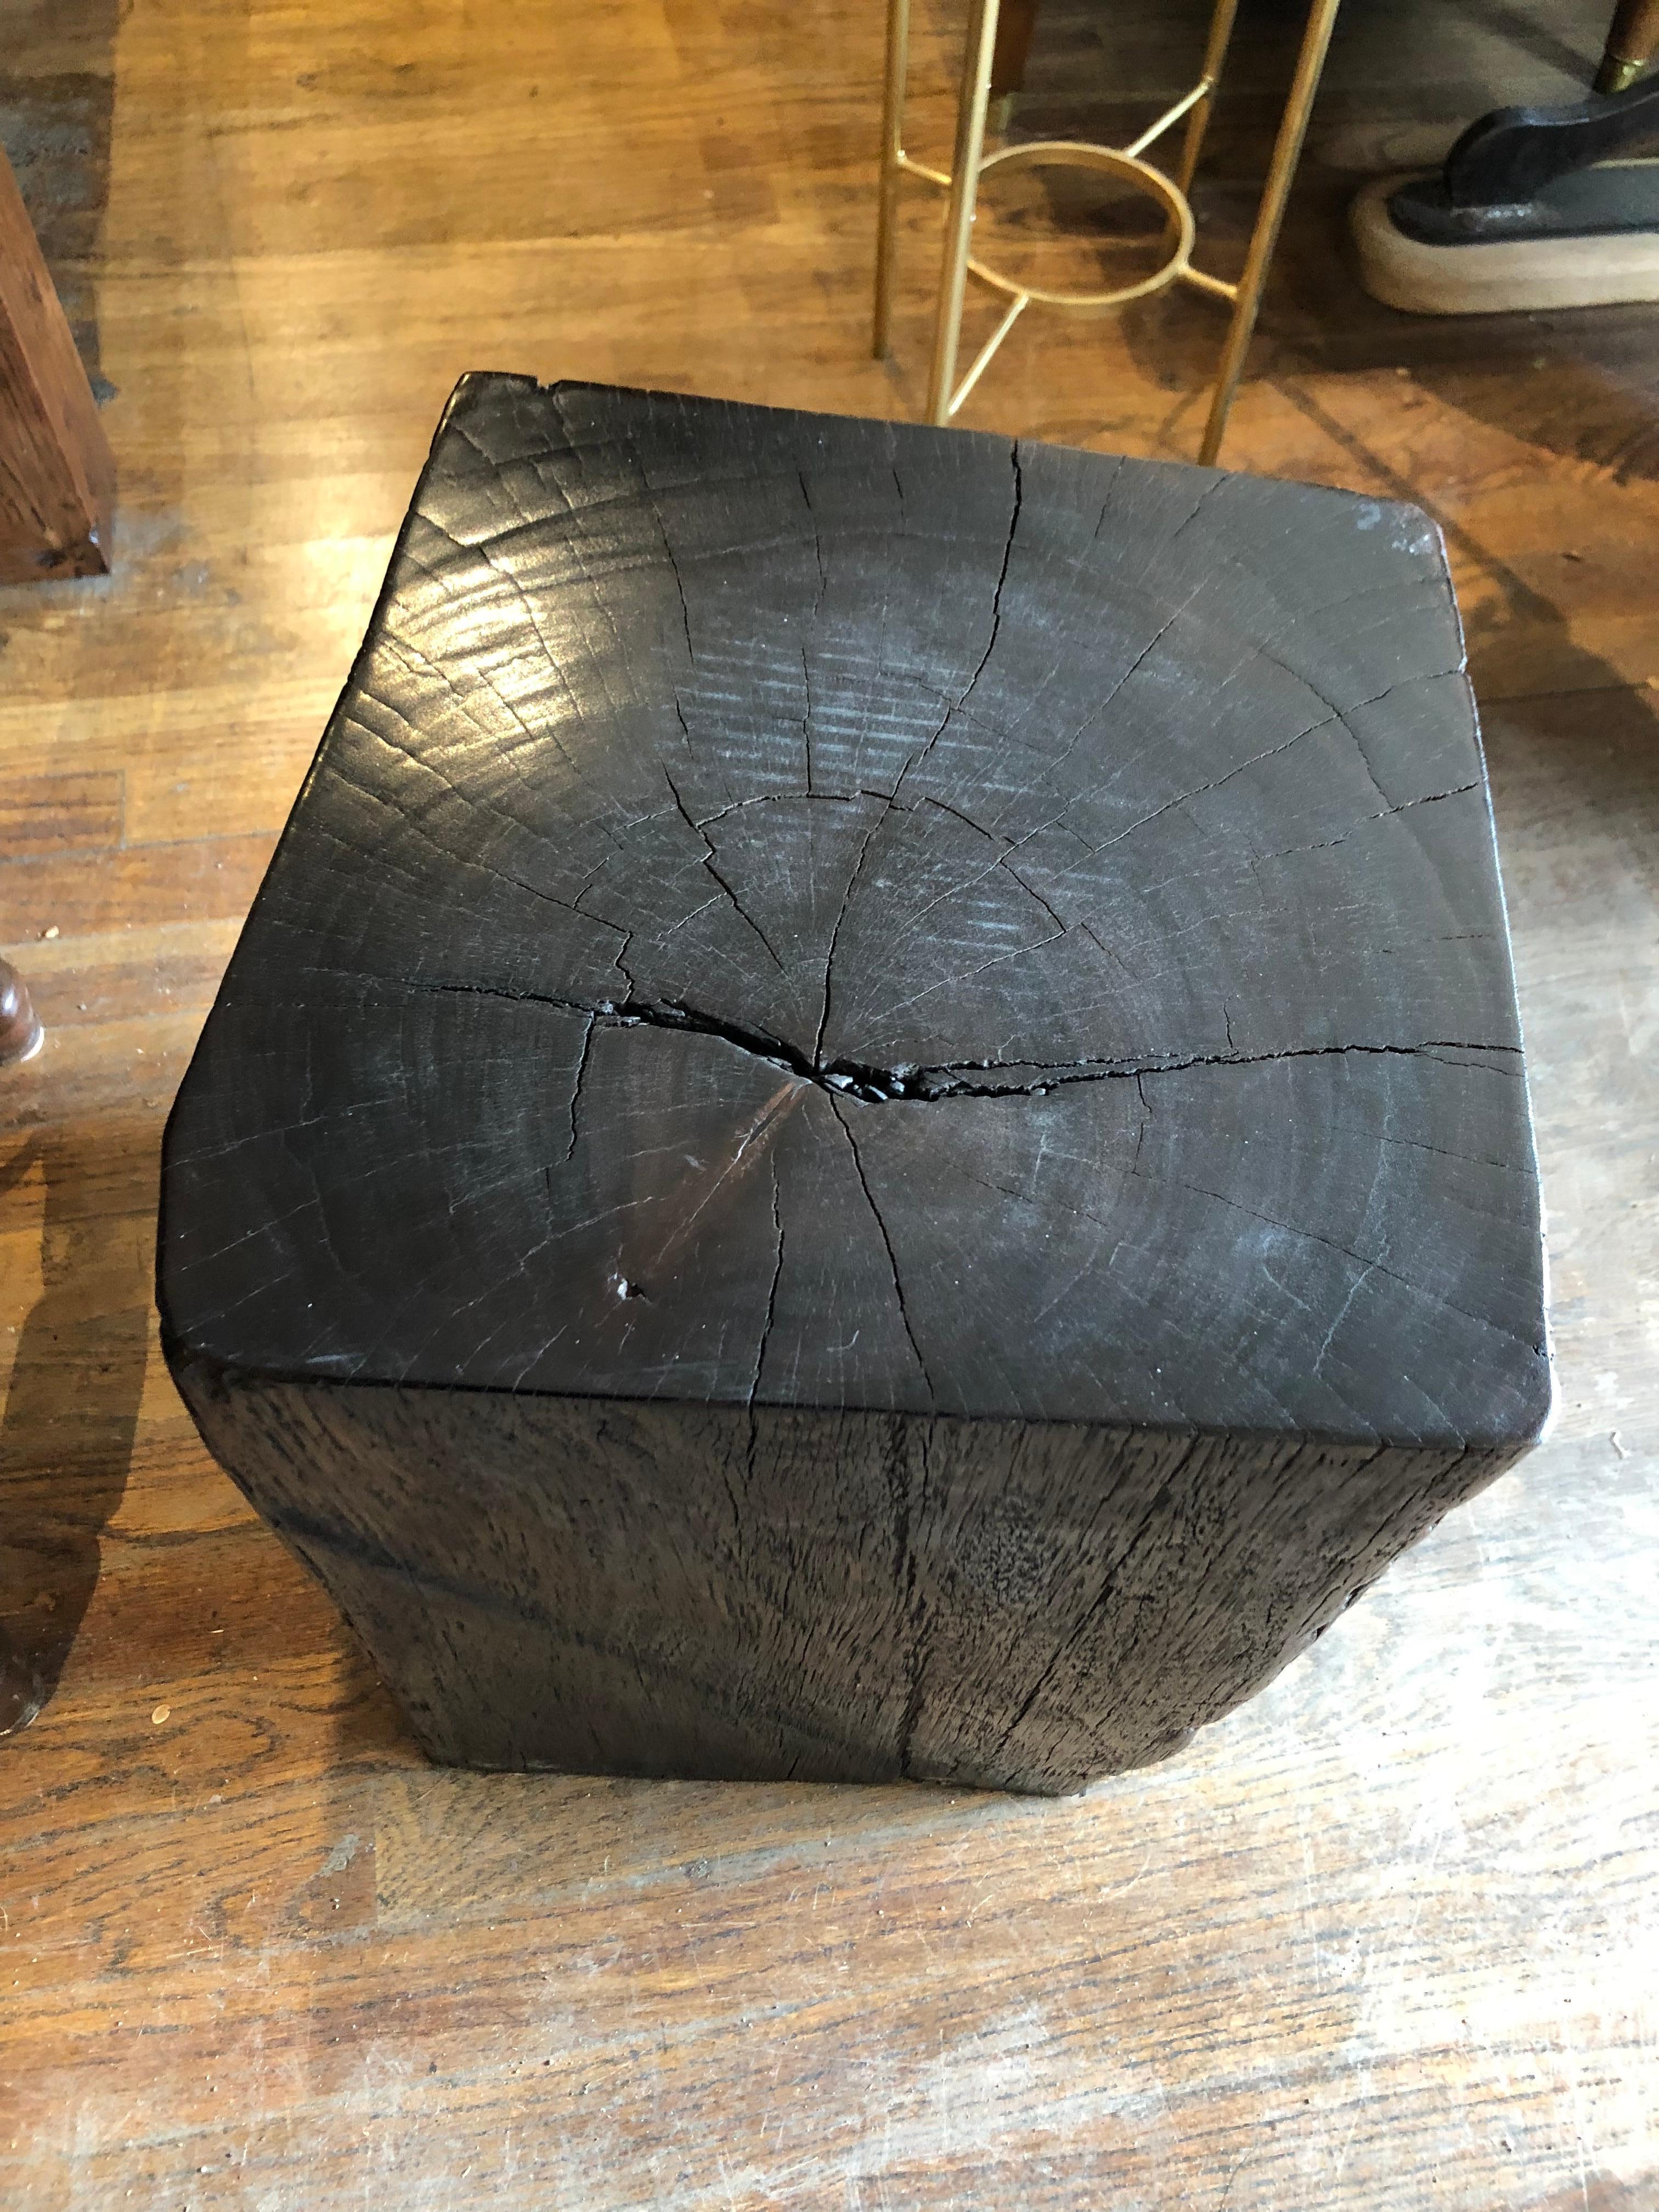 Cut from the bridge supports recovered from the Mahakam River in Borneo. 
Highly polished with a deep lustrous patination. Great to use as a small side table or pedestal. 
Measures: 18